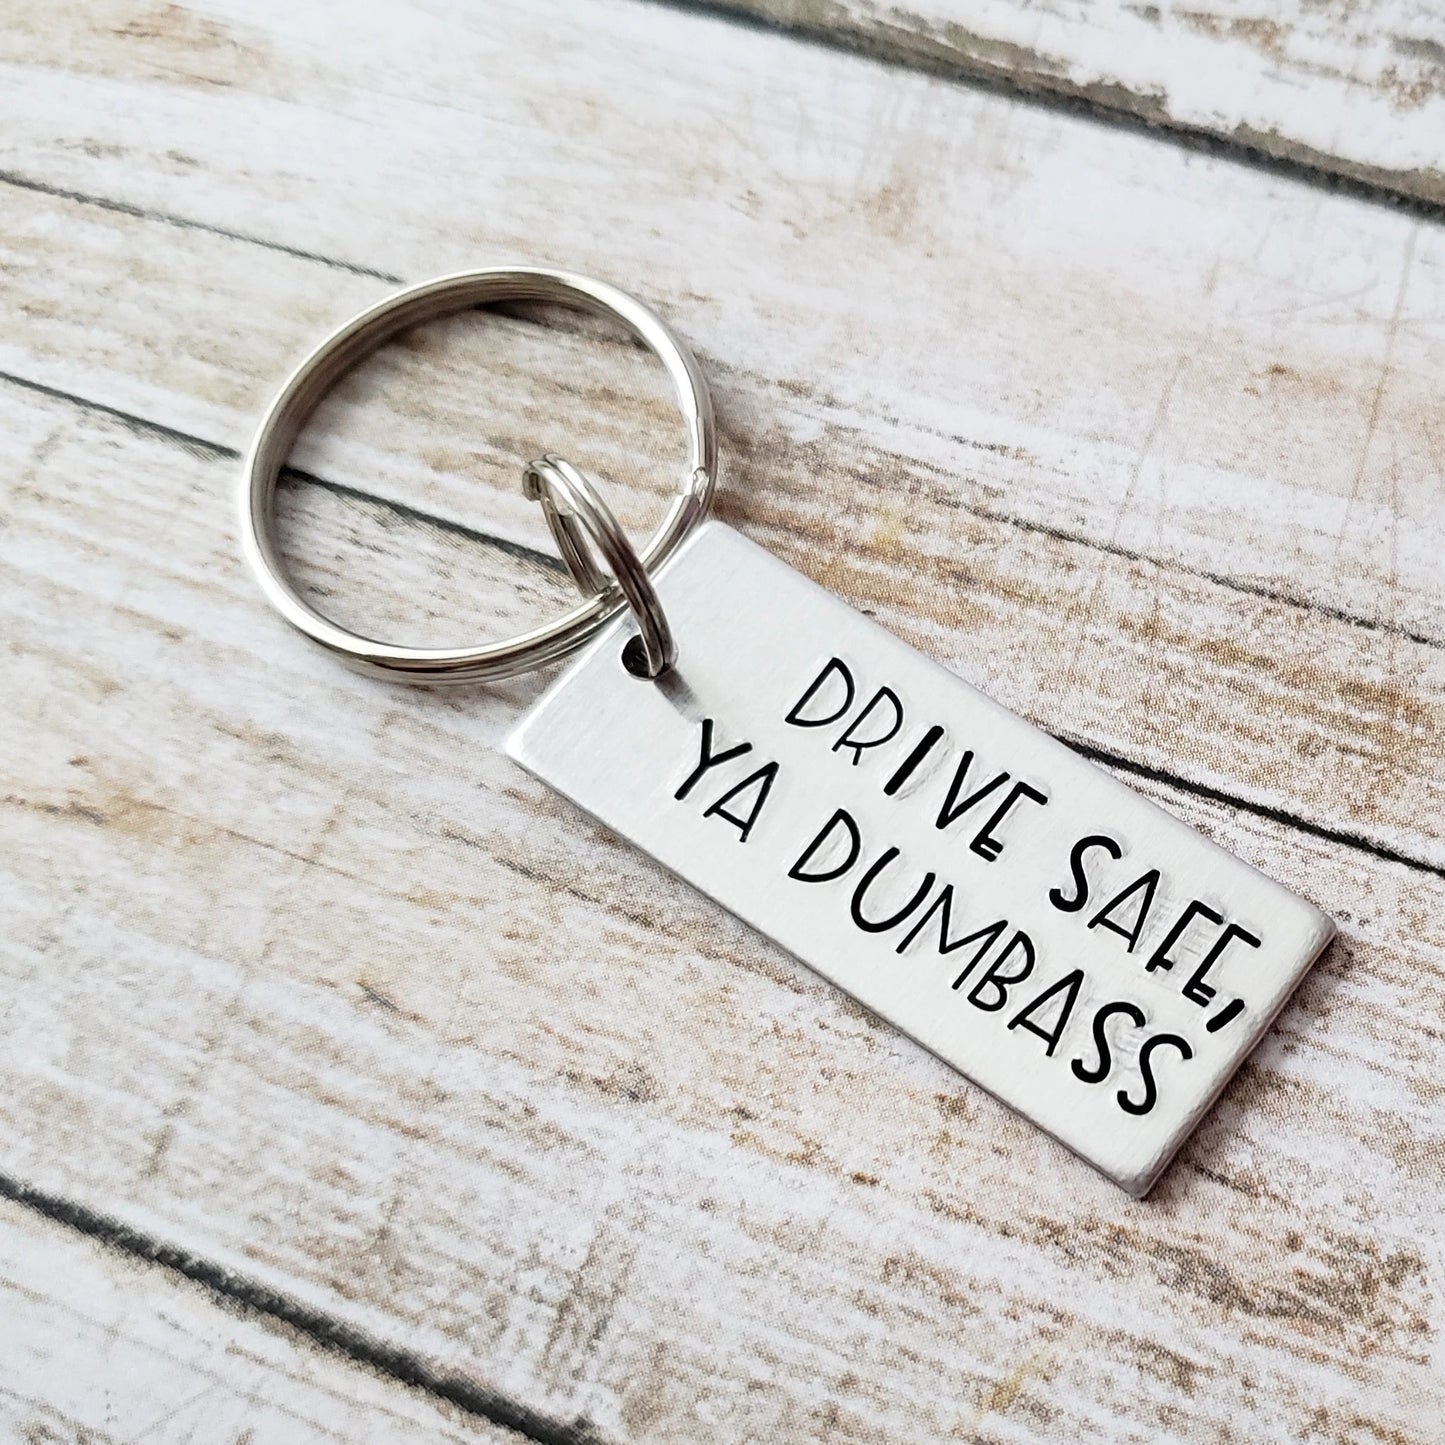 Drive Safe Ya Dumbass Keychain, Funny Key Chain for Siblings, Hand Stamped Keychain